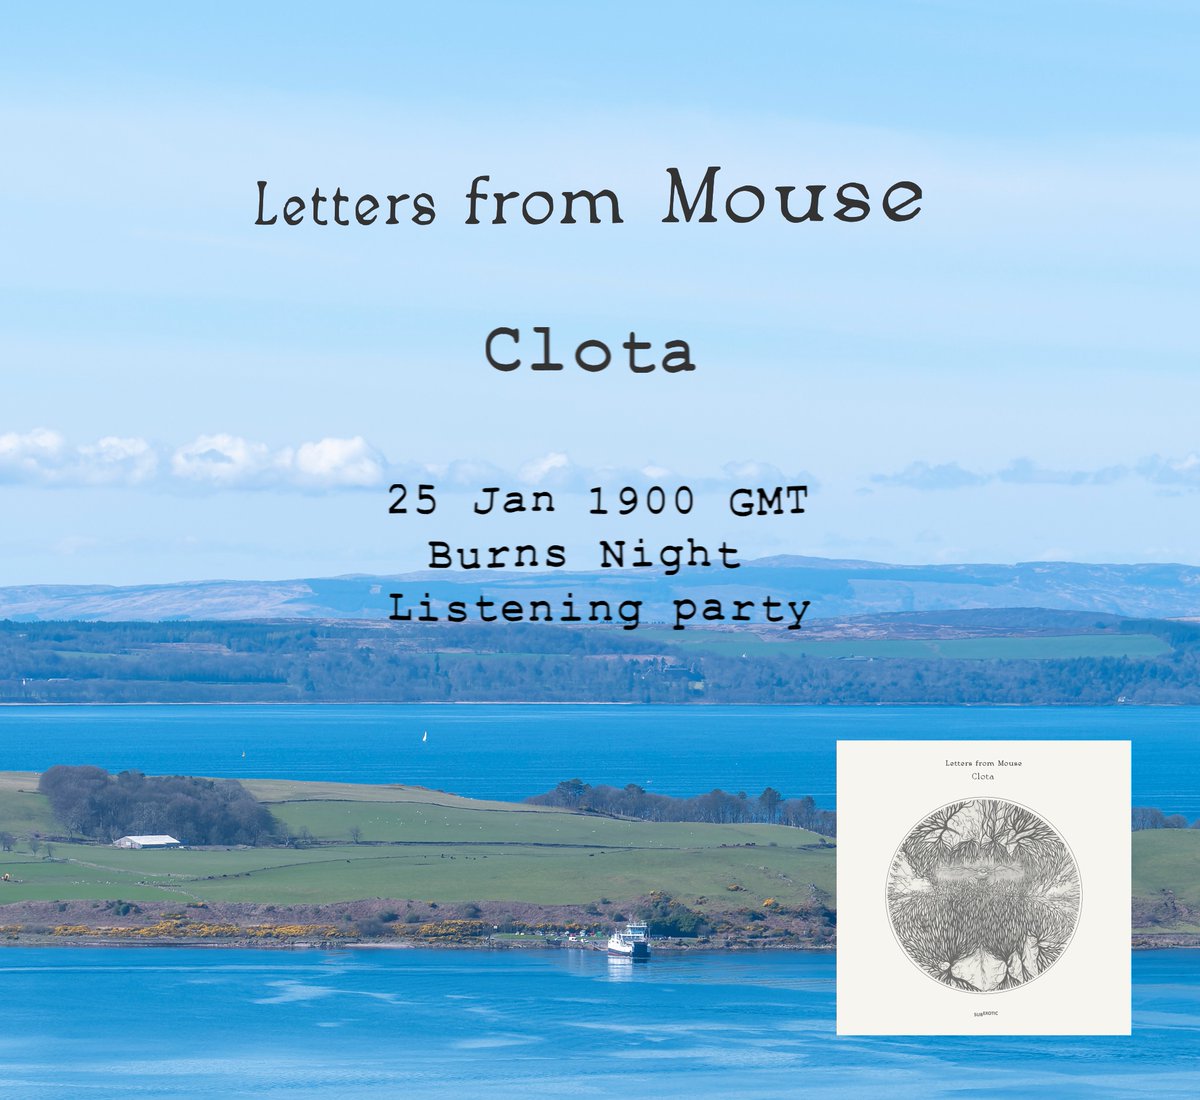 LETTERS FROM MOUSE Bandcamp Listening Party Thursday 25 Jan 1900 GMT Treat yourself to an evening with Steven Anderson @lfm_IDM and his new LP - CLOTA lettersfrommouse.bandcamp.com/merch/clota-li…